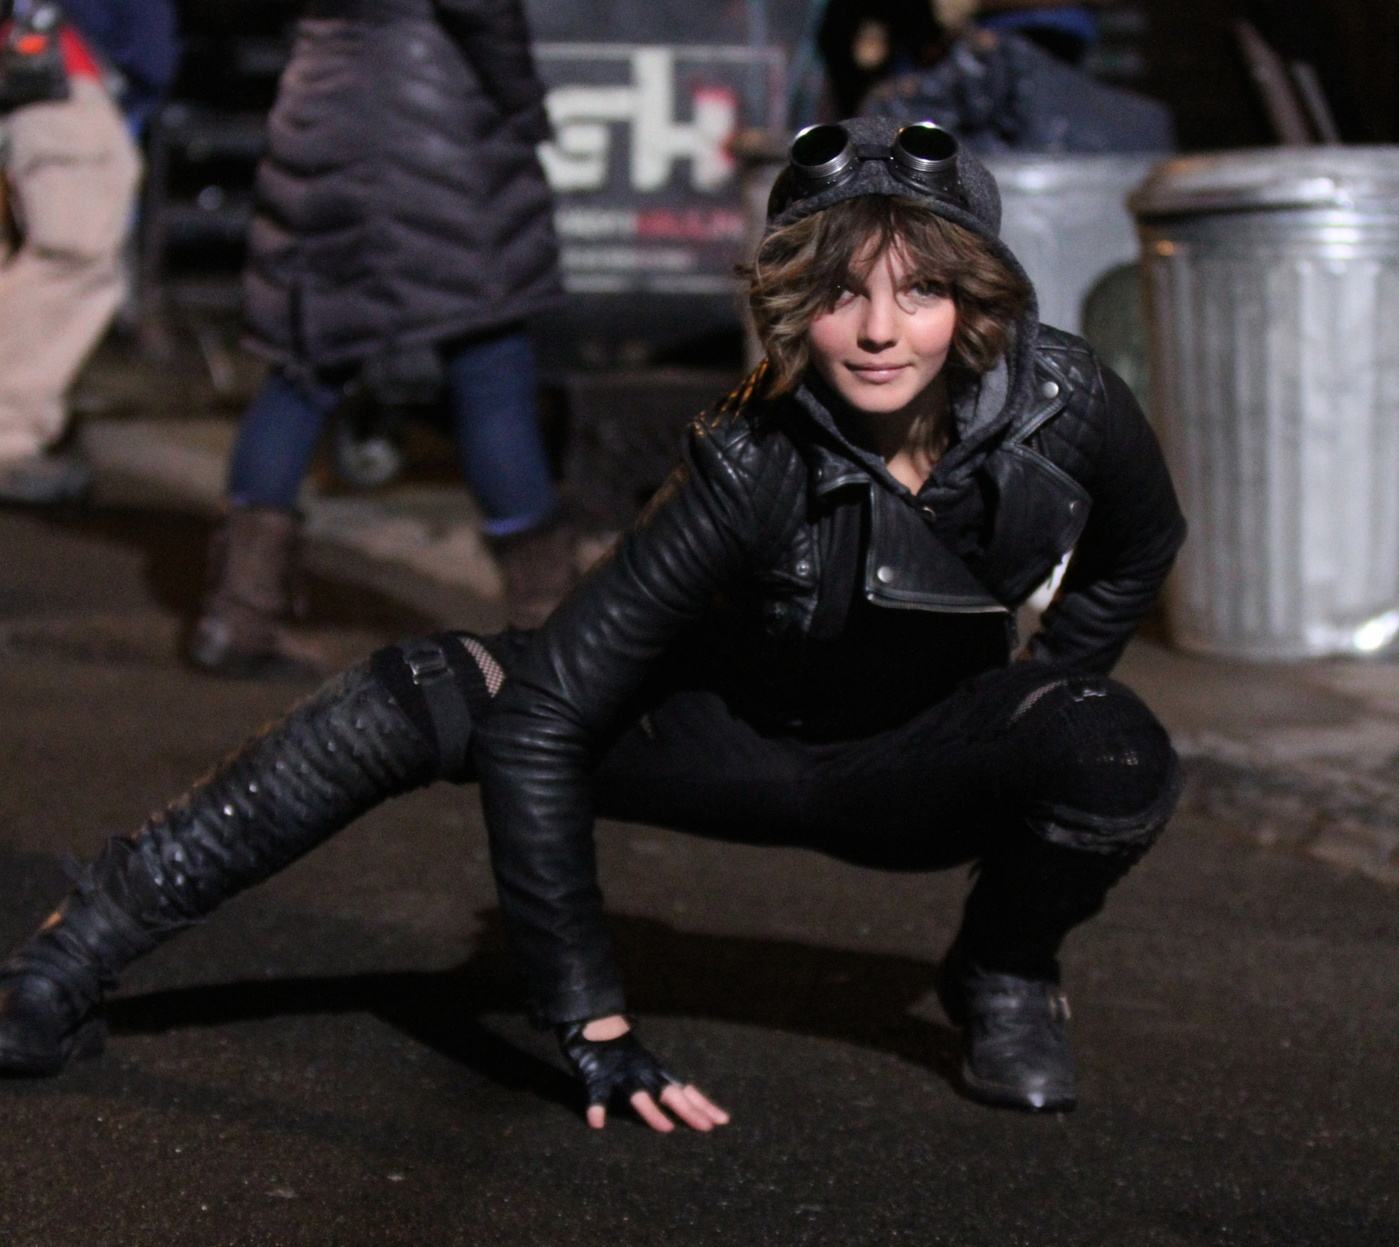 Camren Bicondova who plays Selina Kyle was pictured on her Catwoman costume on the set of the ‘Gotham’ TV series in Downtown, Manhattan, New York City